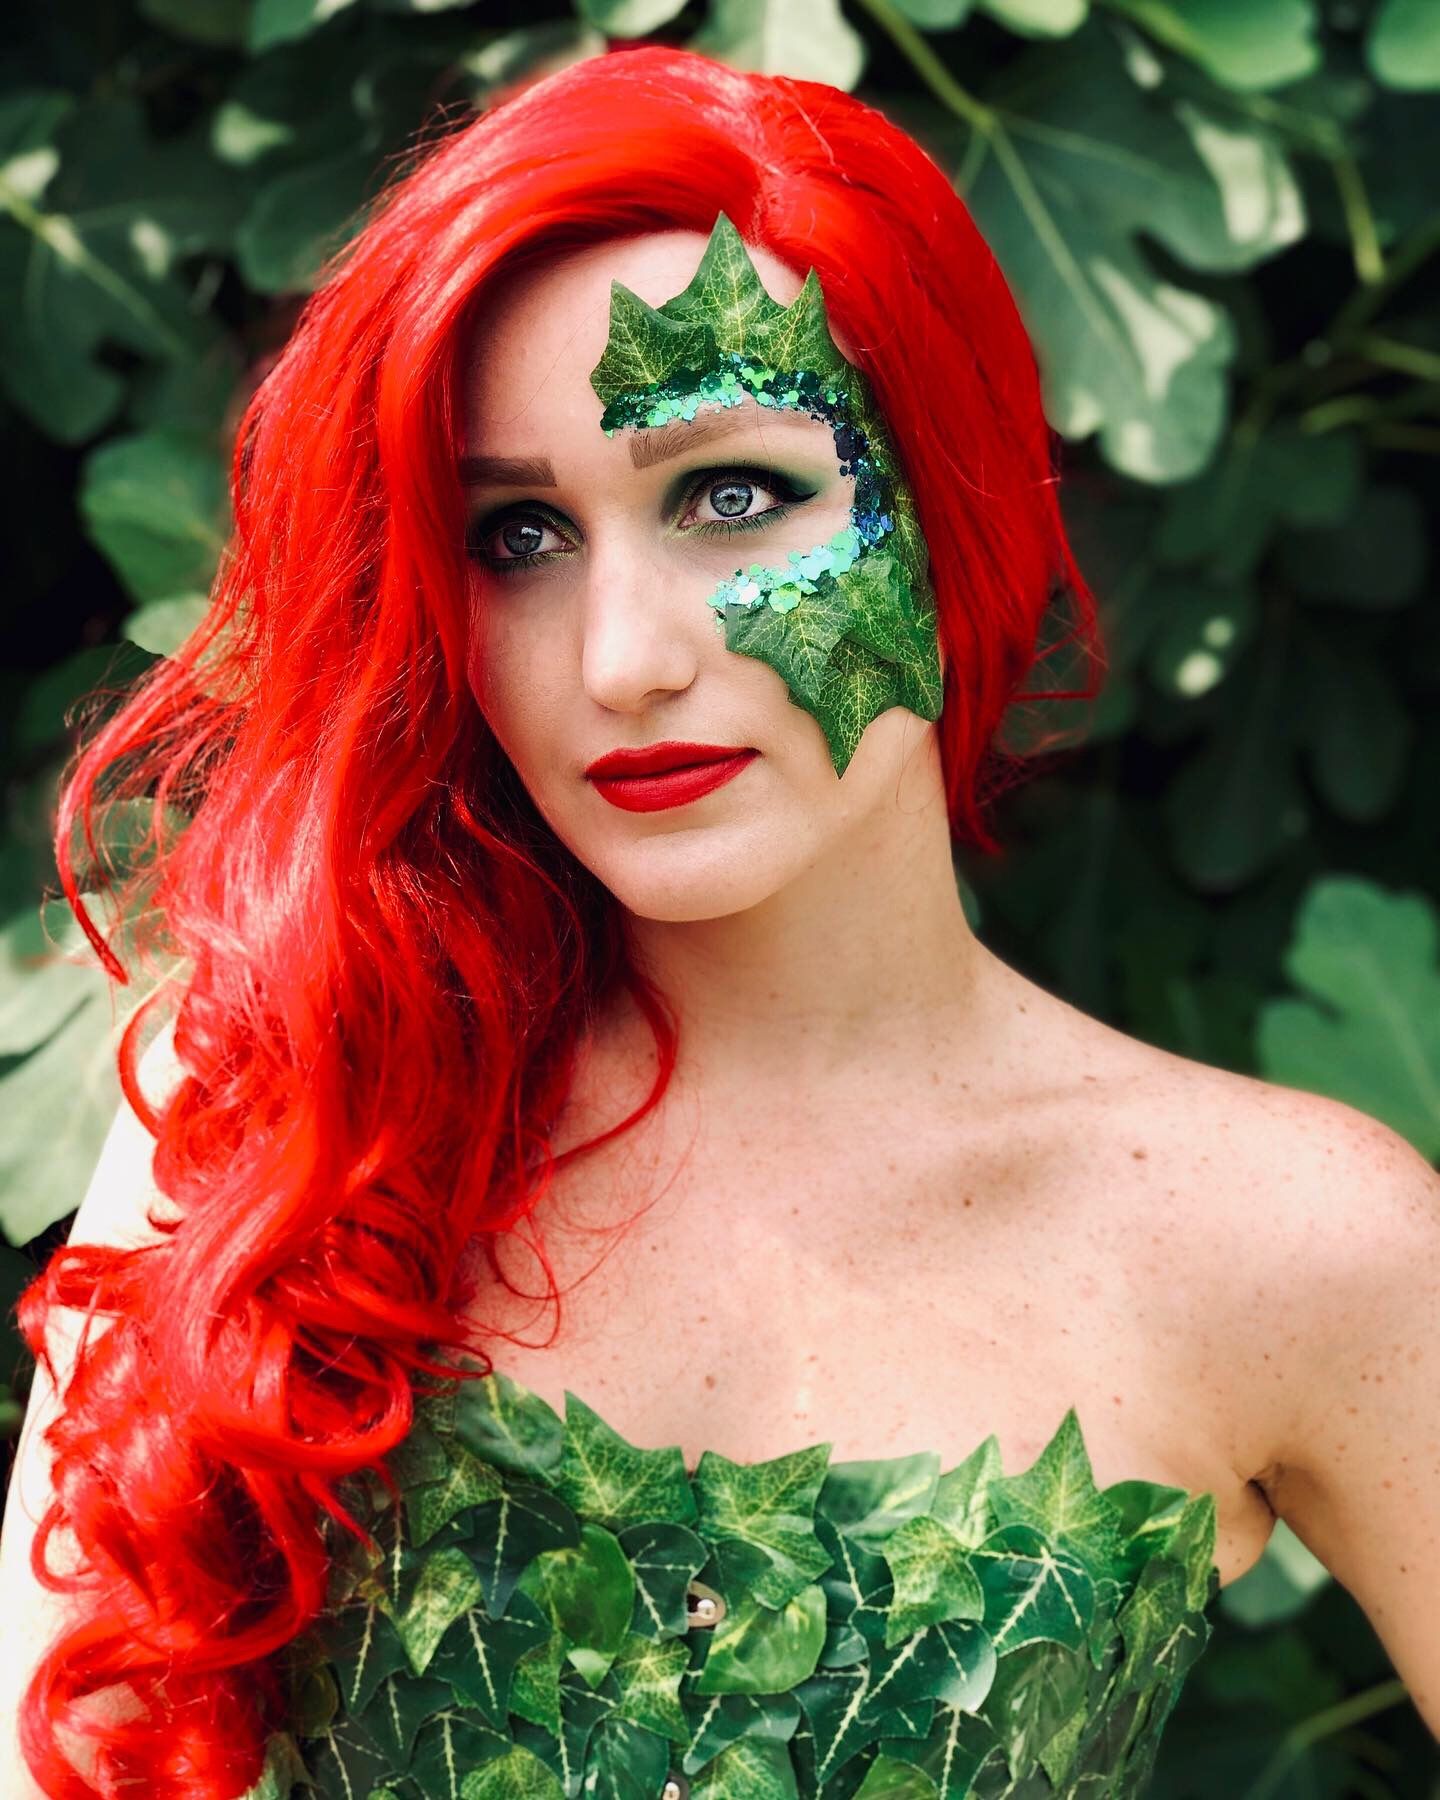 poison ivy character makeup